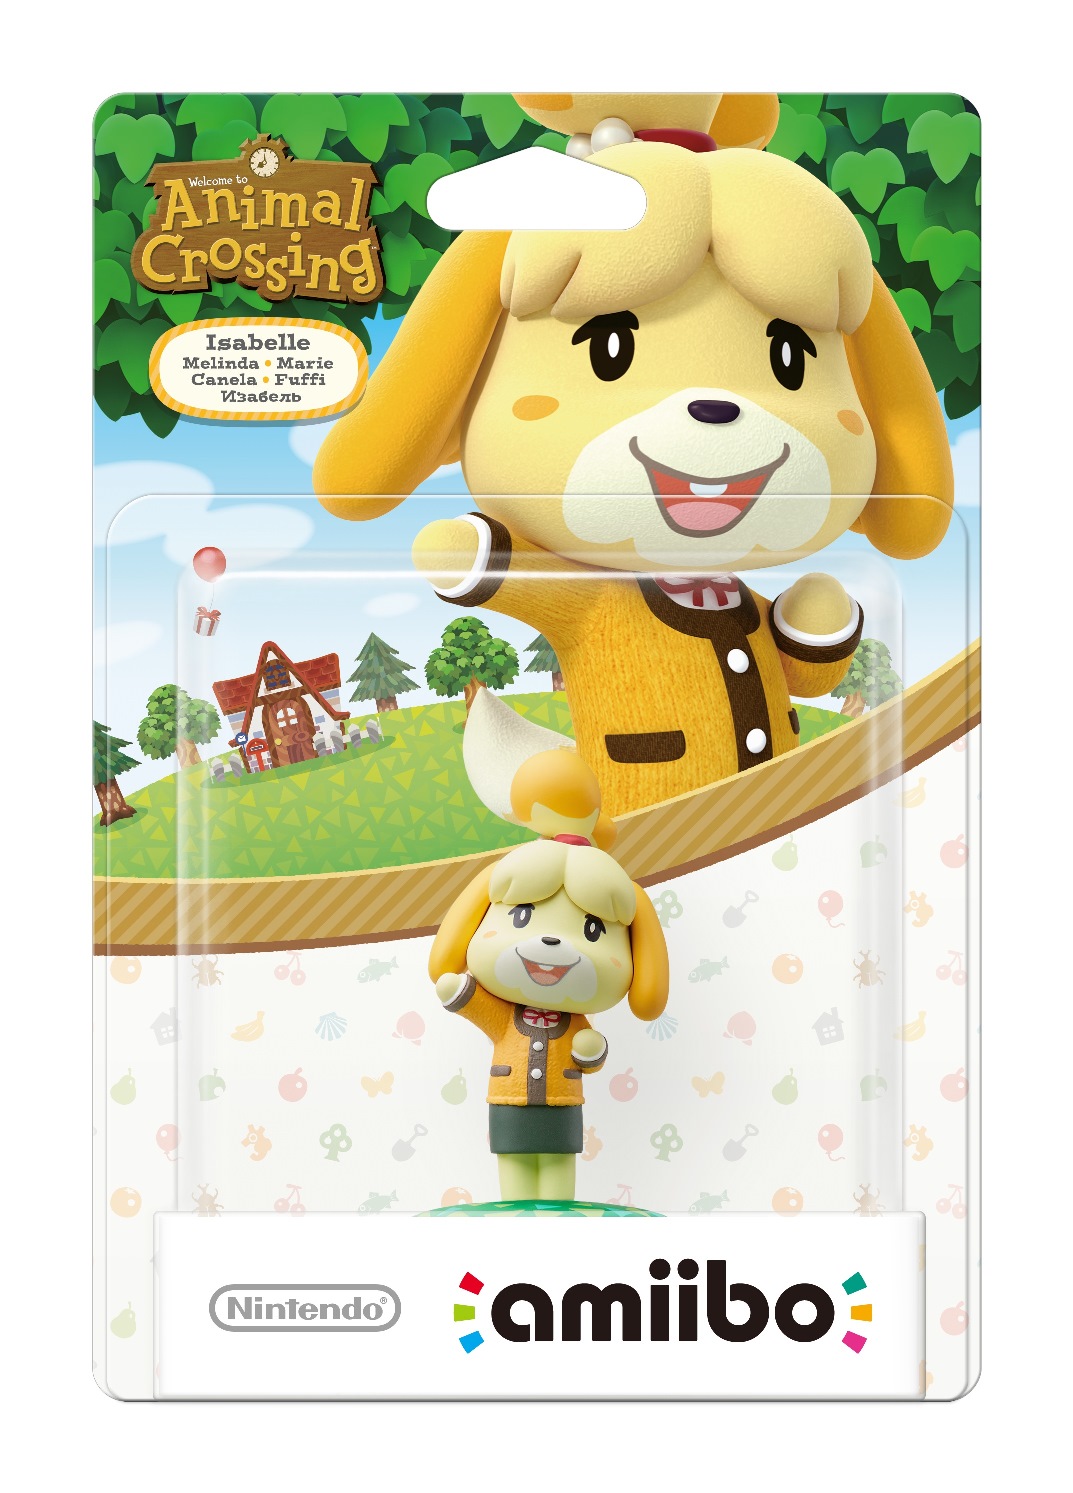 Packaging for the Animal Crossing amiibo figures - Nintendo Everything